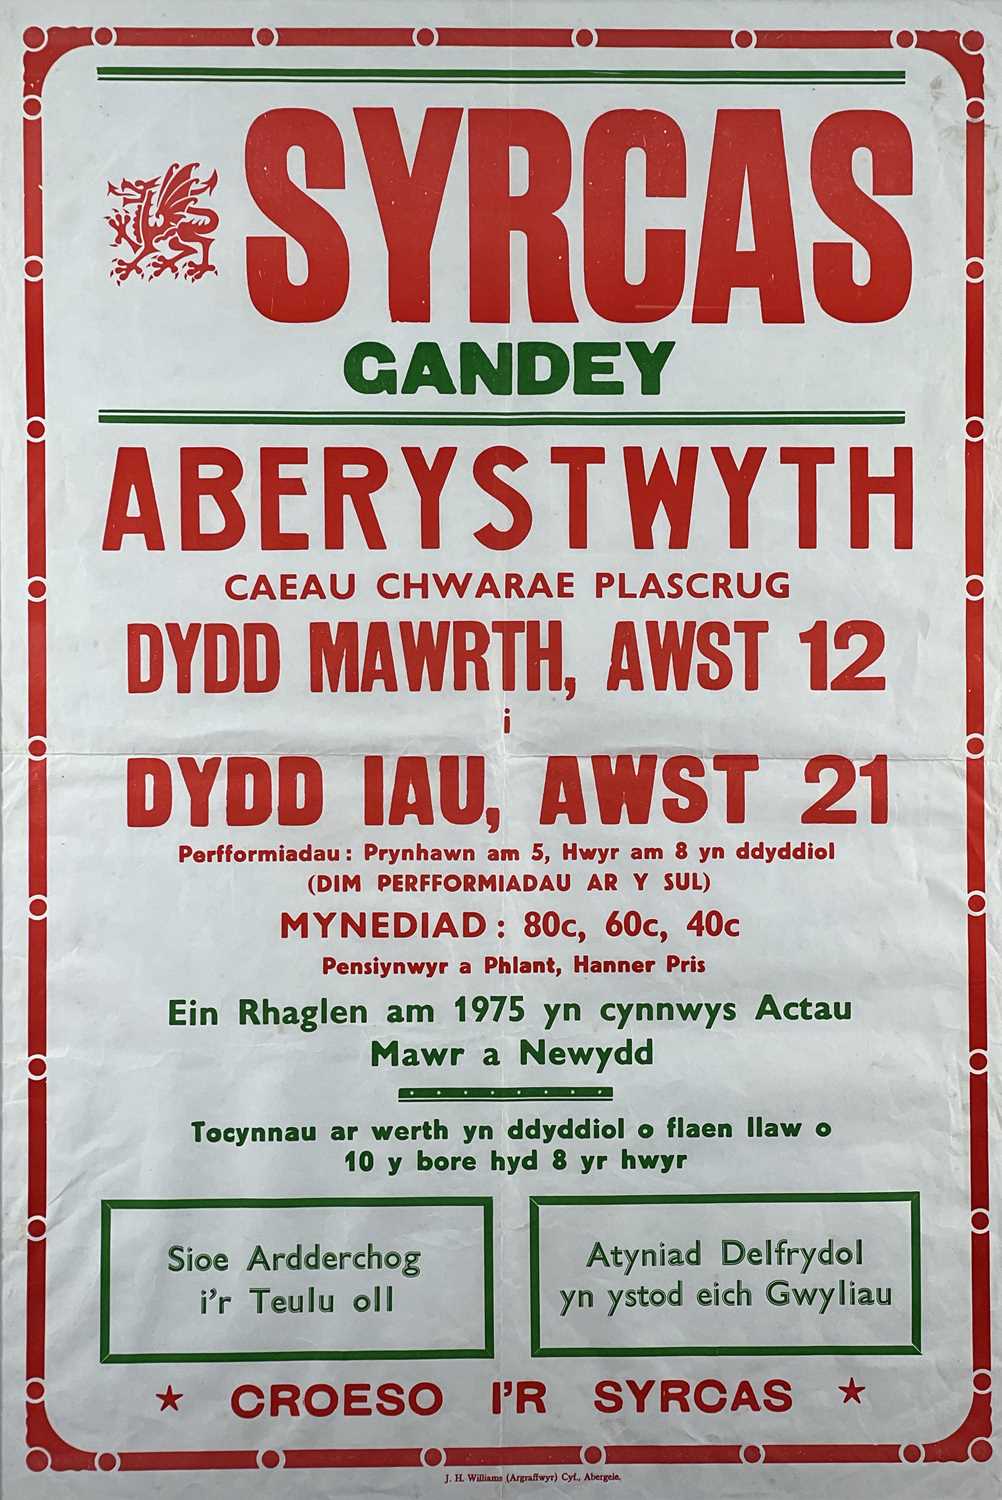 VINTAGE 1975 COLOURED CIRCUS ADVERTISING POSTER in Welsh for Gandey's Syrcas at the Plascrug Fields,